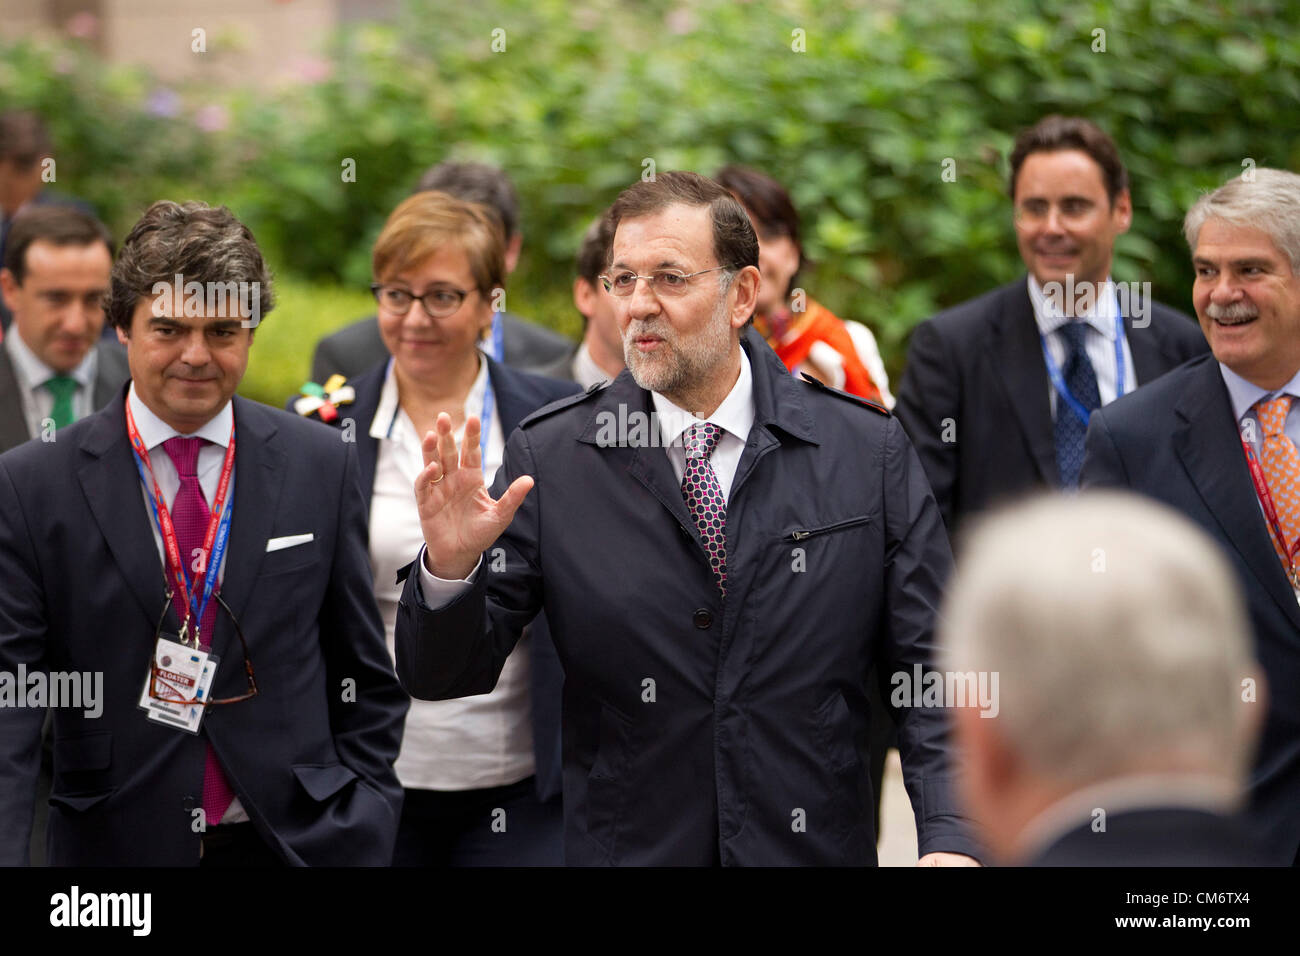 Brussels, Belgium. 18th October 2012. Mariano Rajoy Brey, Prime Minister of Spain arriving at the European Council meeting in Brussels, Justus Lipsius Building.  Photo:Jeff Gilbert. 18.10.2012. Brussels, Belgium. Credit:  Jeff Gilbert / Alamy Live News Stock Photo